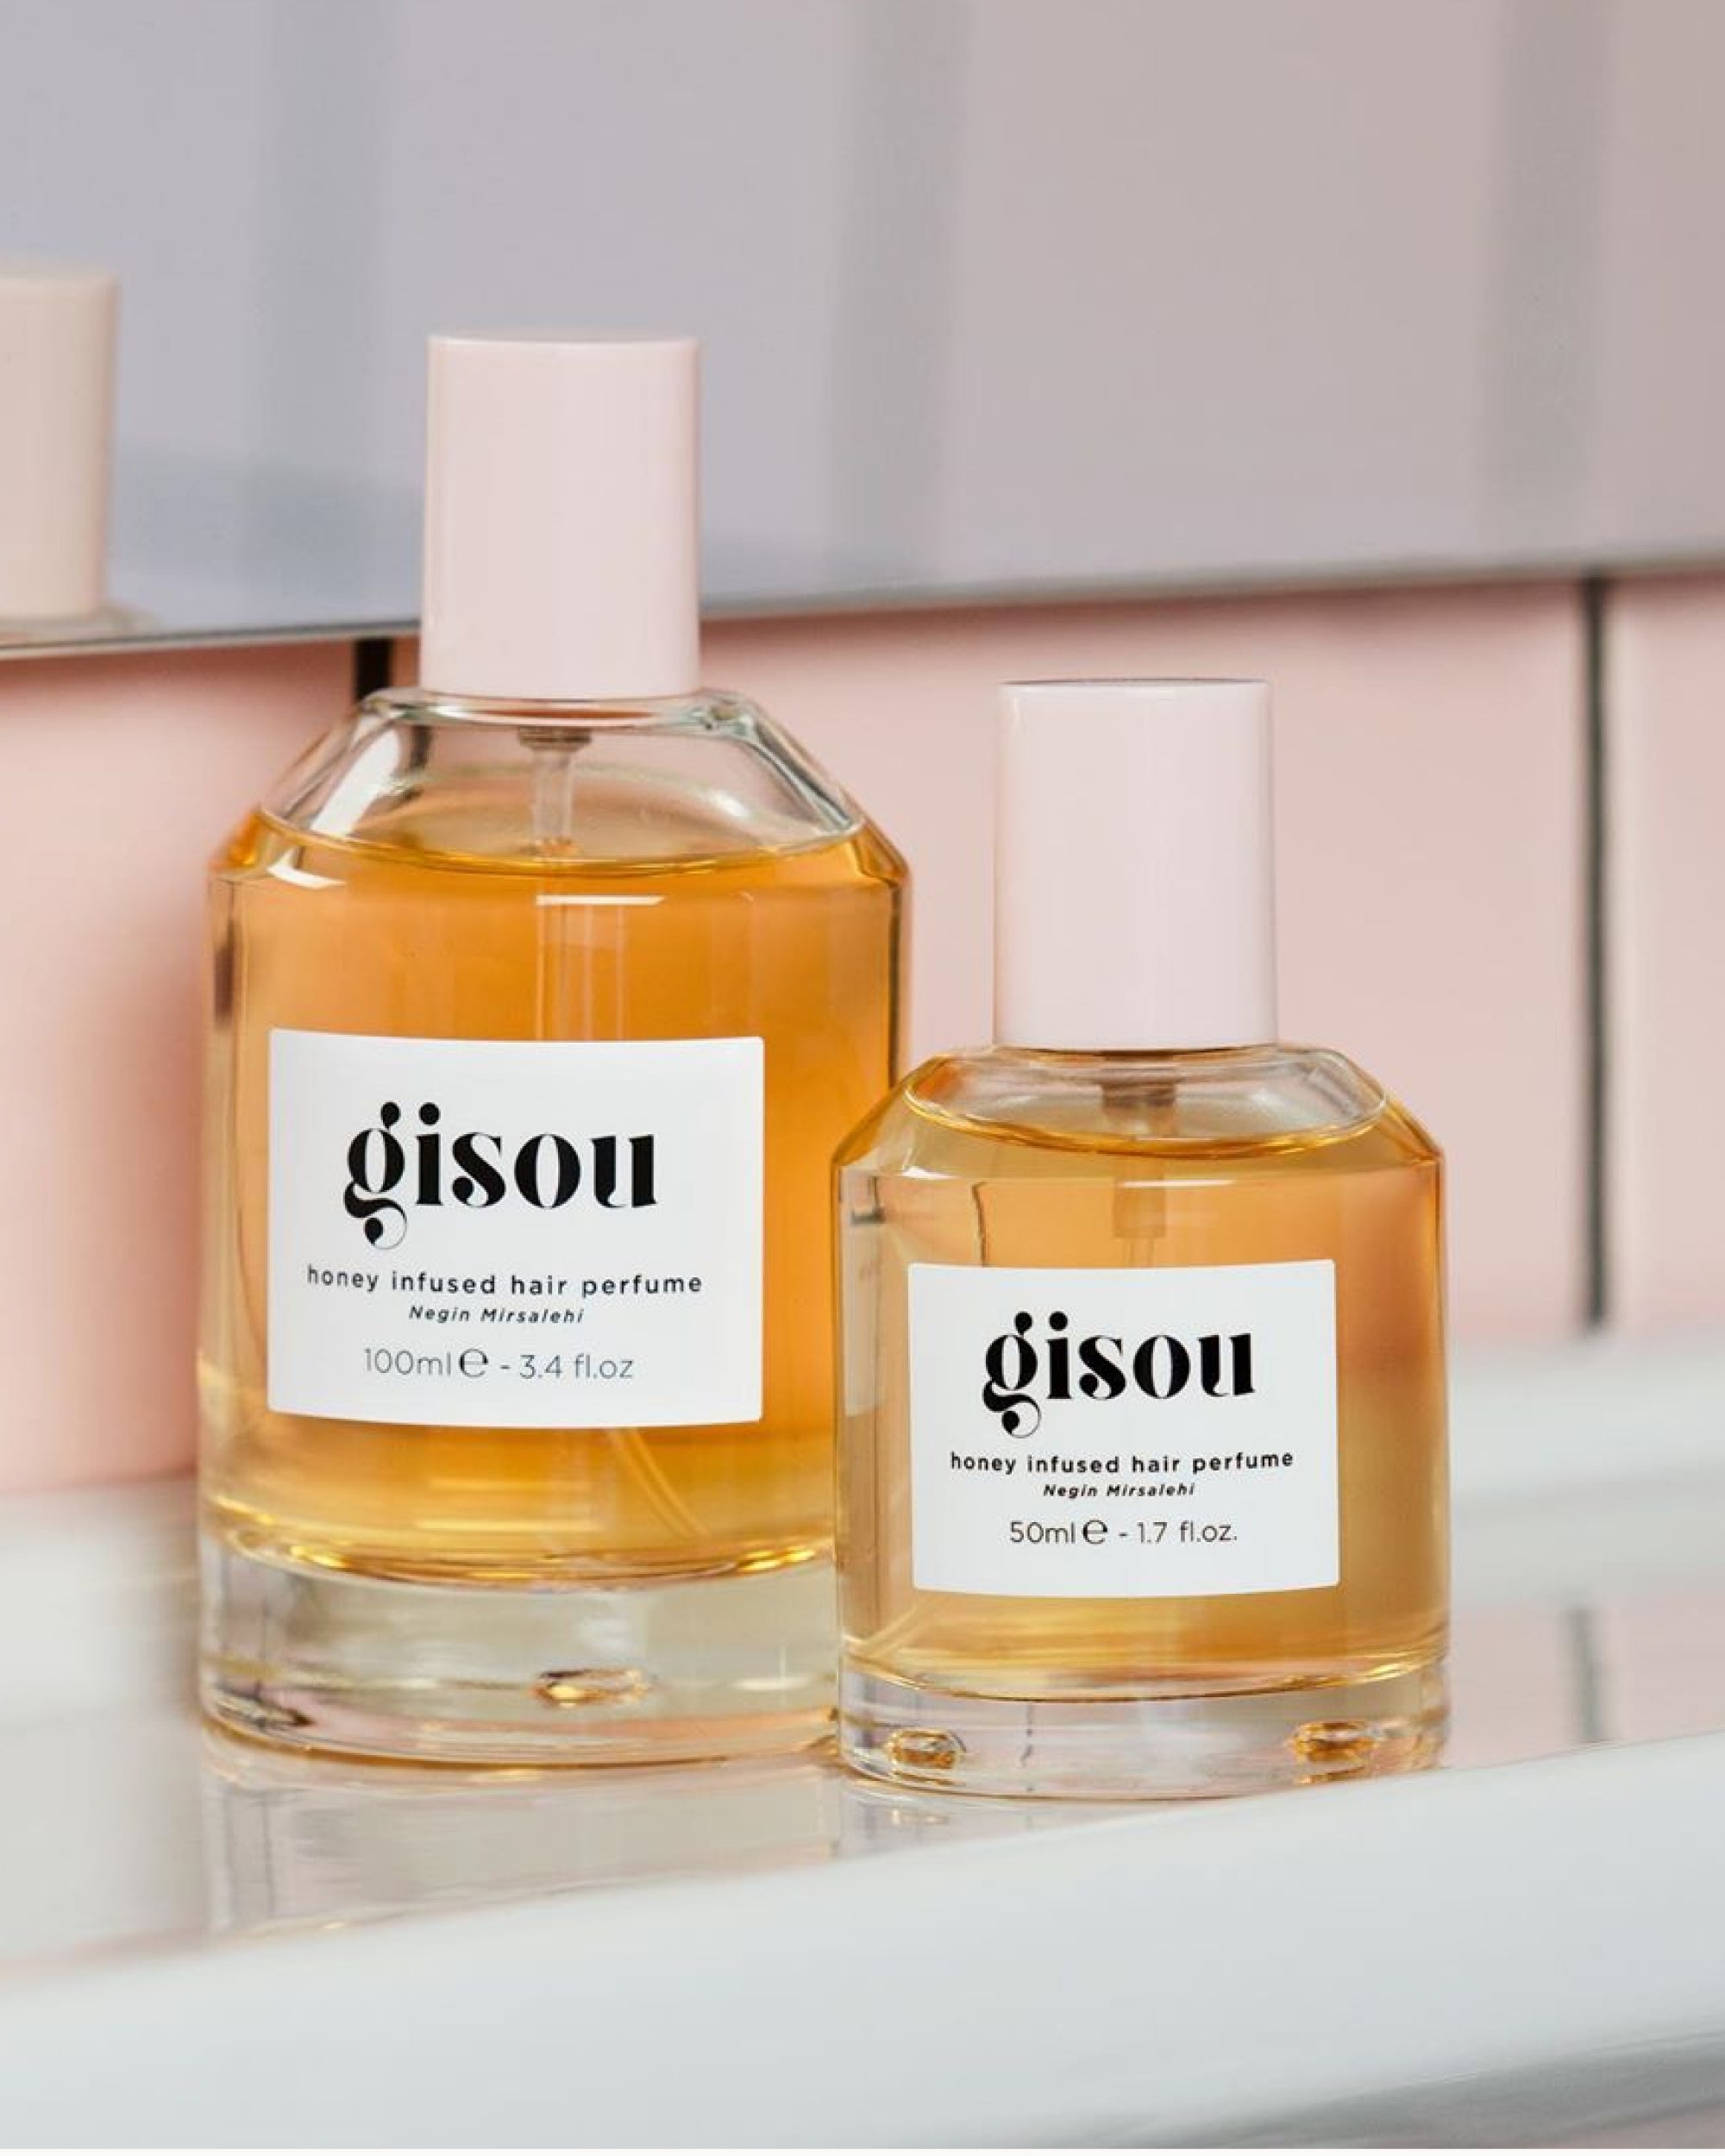 GISOU Honey Infused Hair Perfume » acquista online